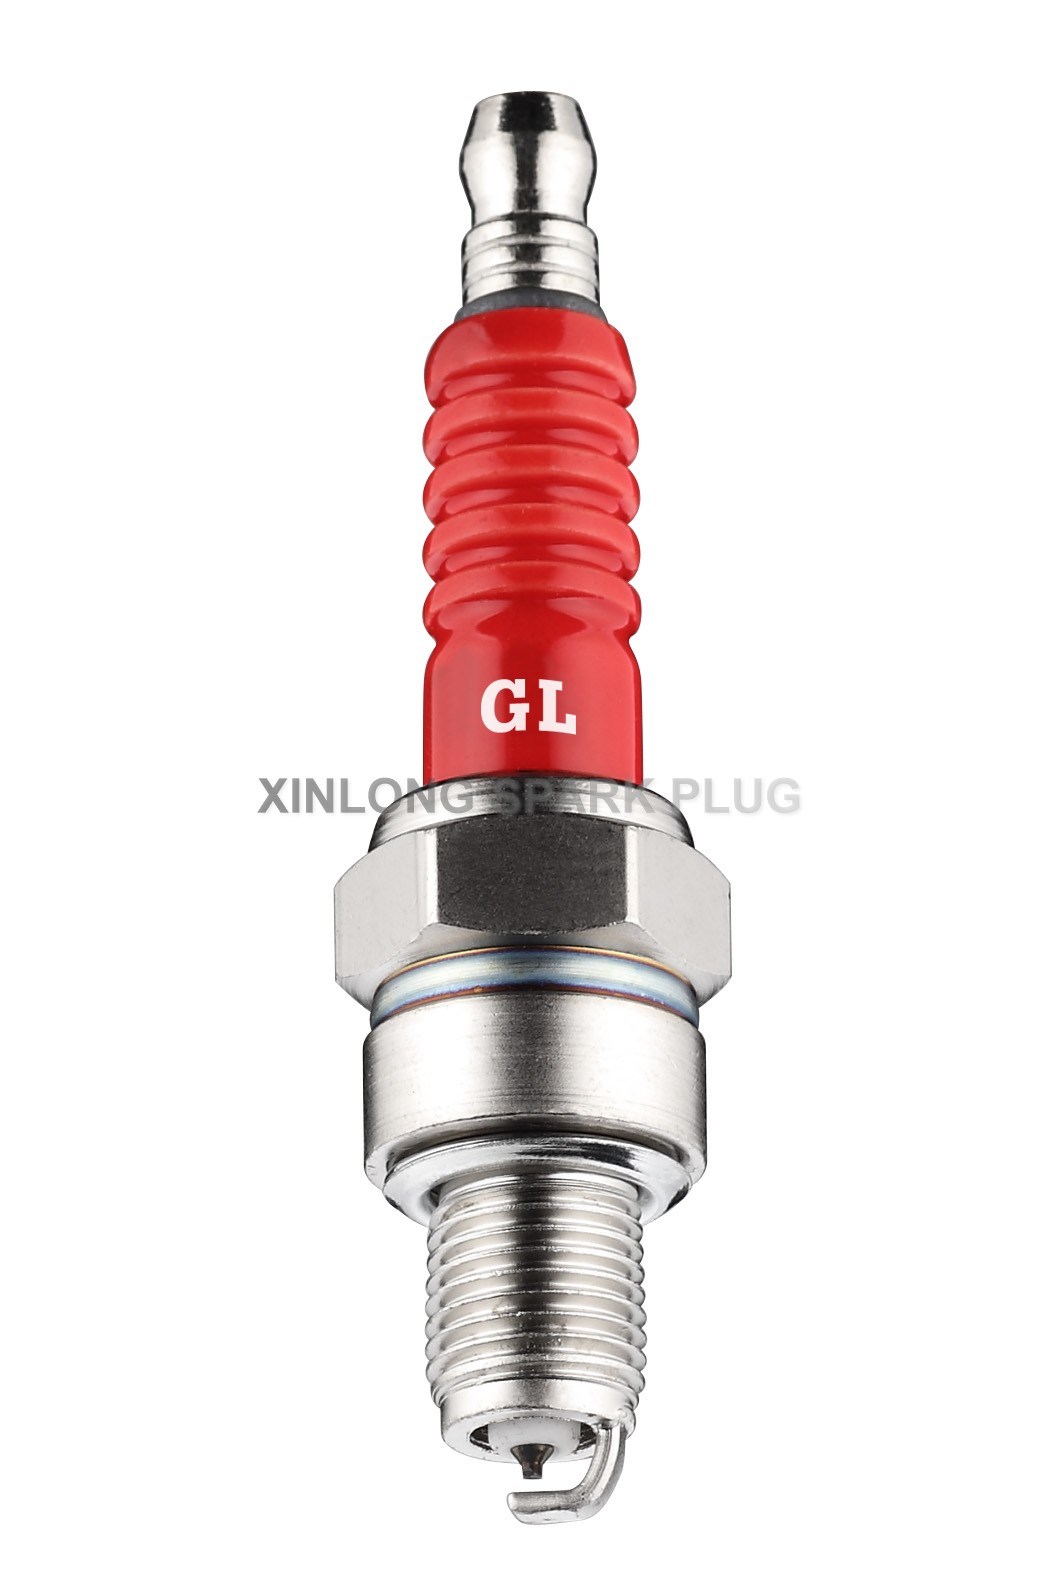 Nickle Alloy Auto Spark Plug Ngk C7hsa for Motorcycle